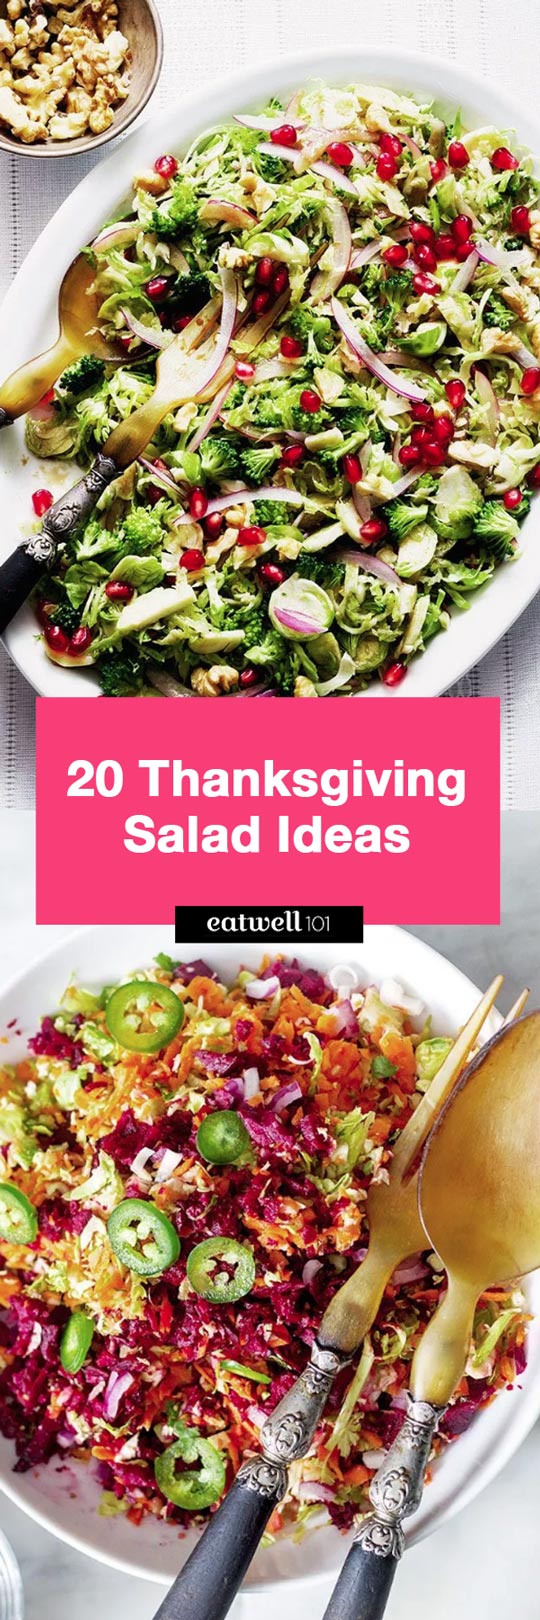 Thanksgiving Salad Recipes: 20 Salad Ideas for Your Thanksgiving Table ...